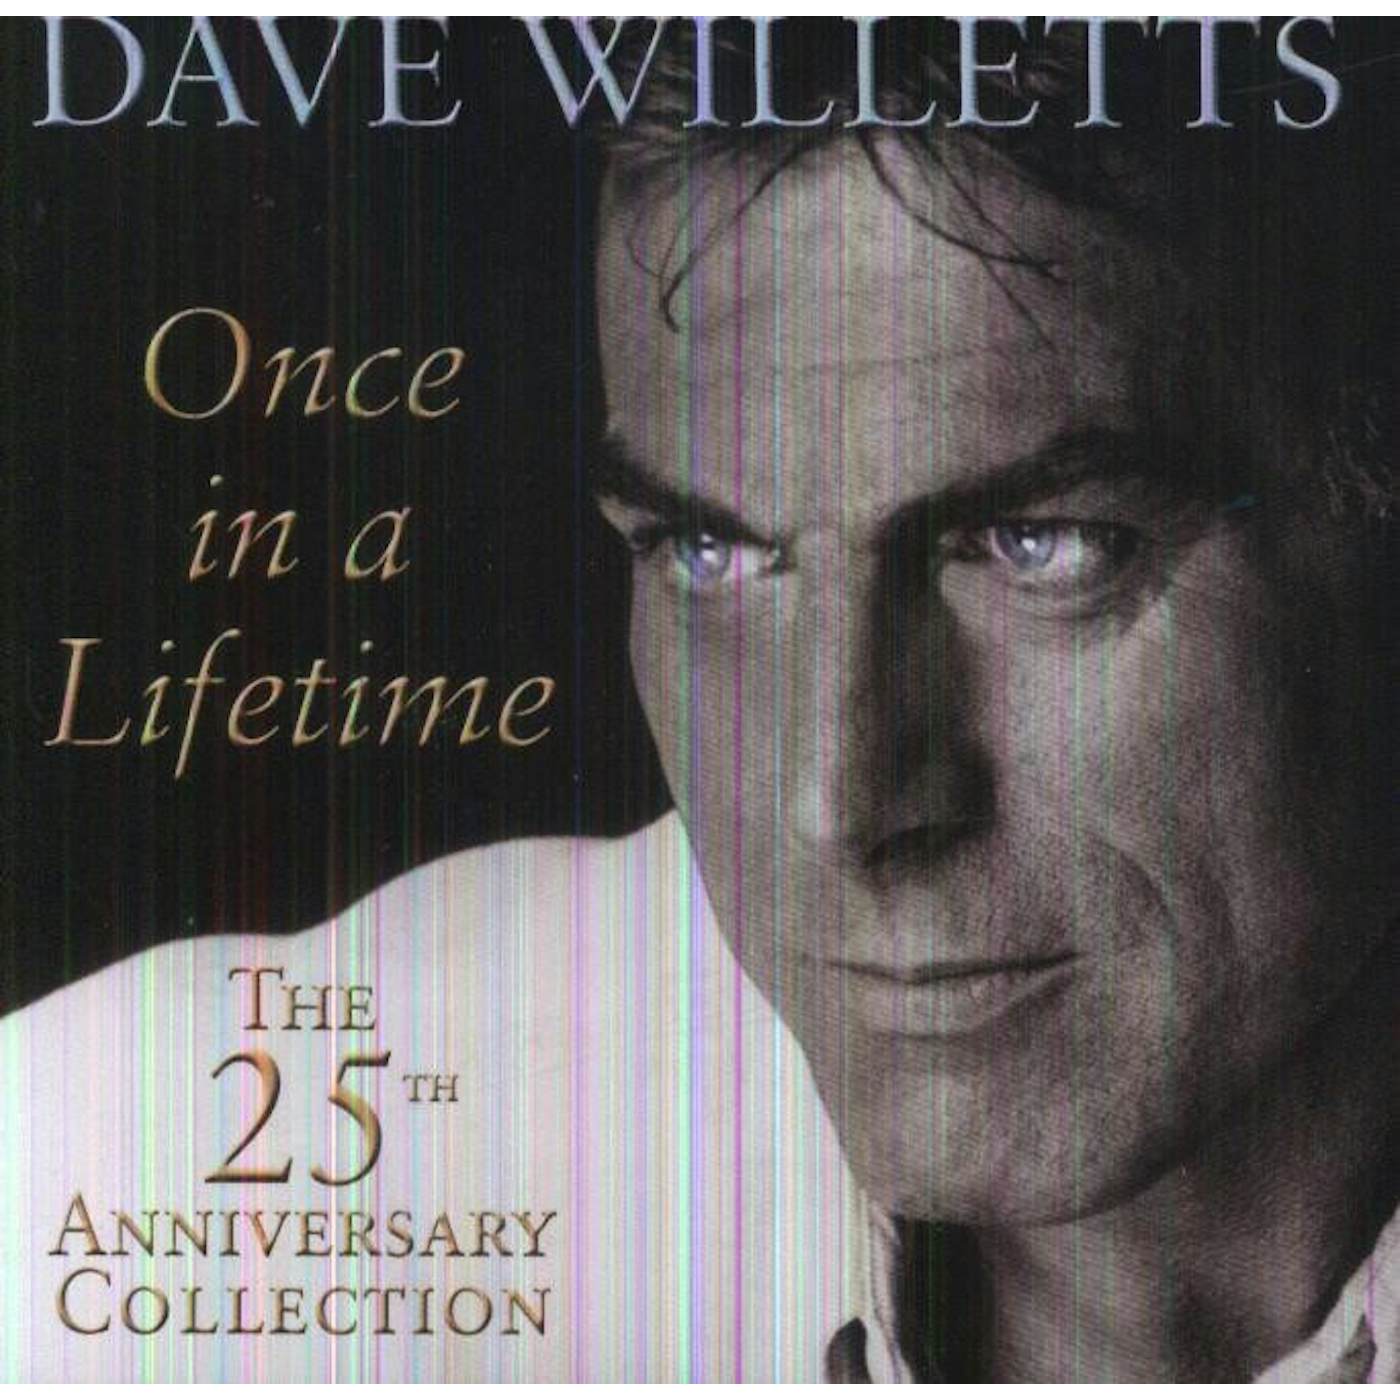 Dave Willetts ONCE IN A LIFETIME: 25TH ANNIVERSARY COLLECTION CD